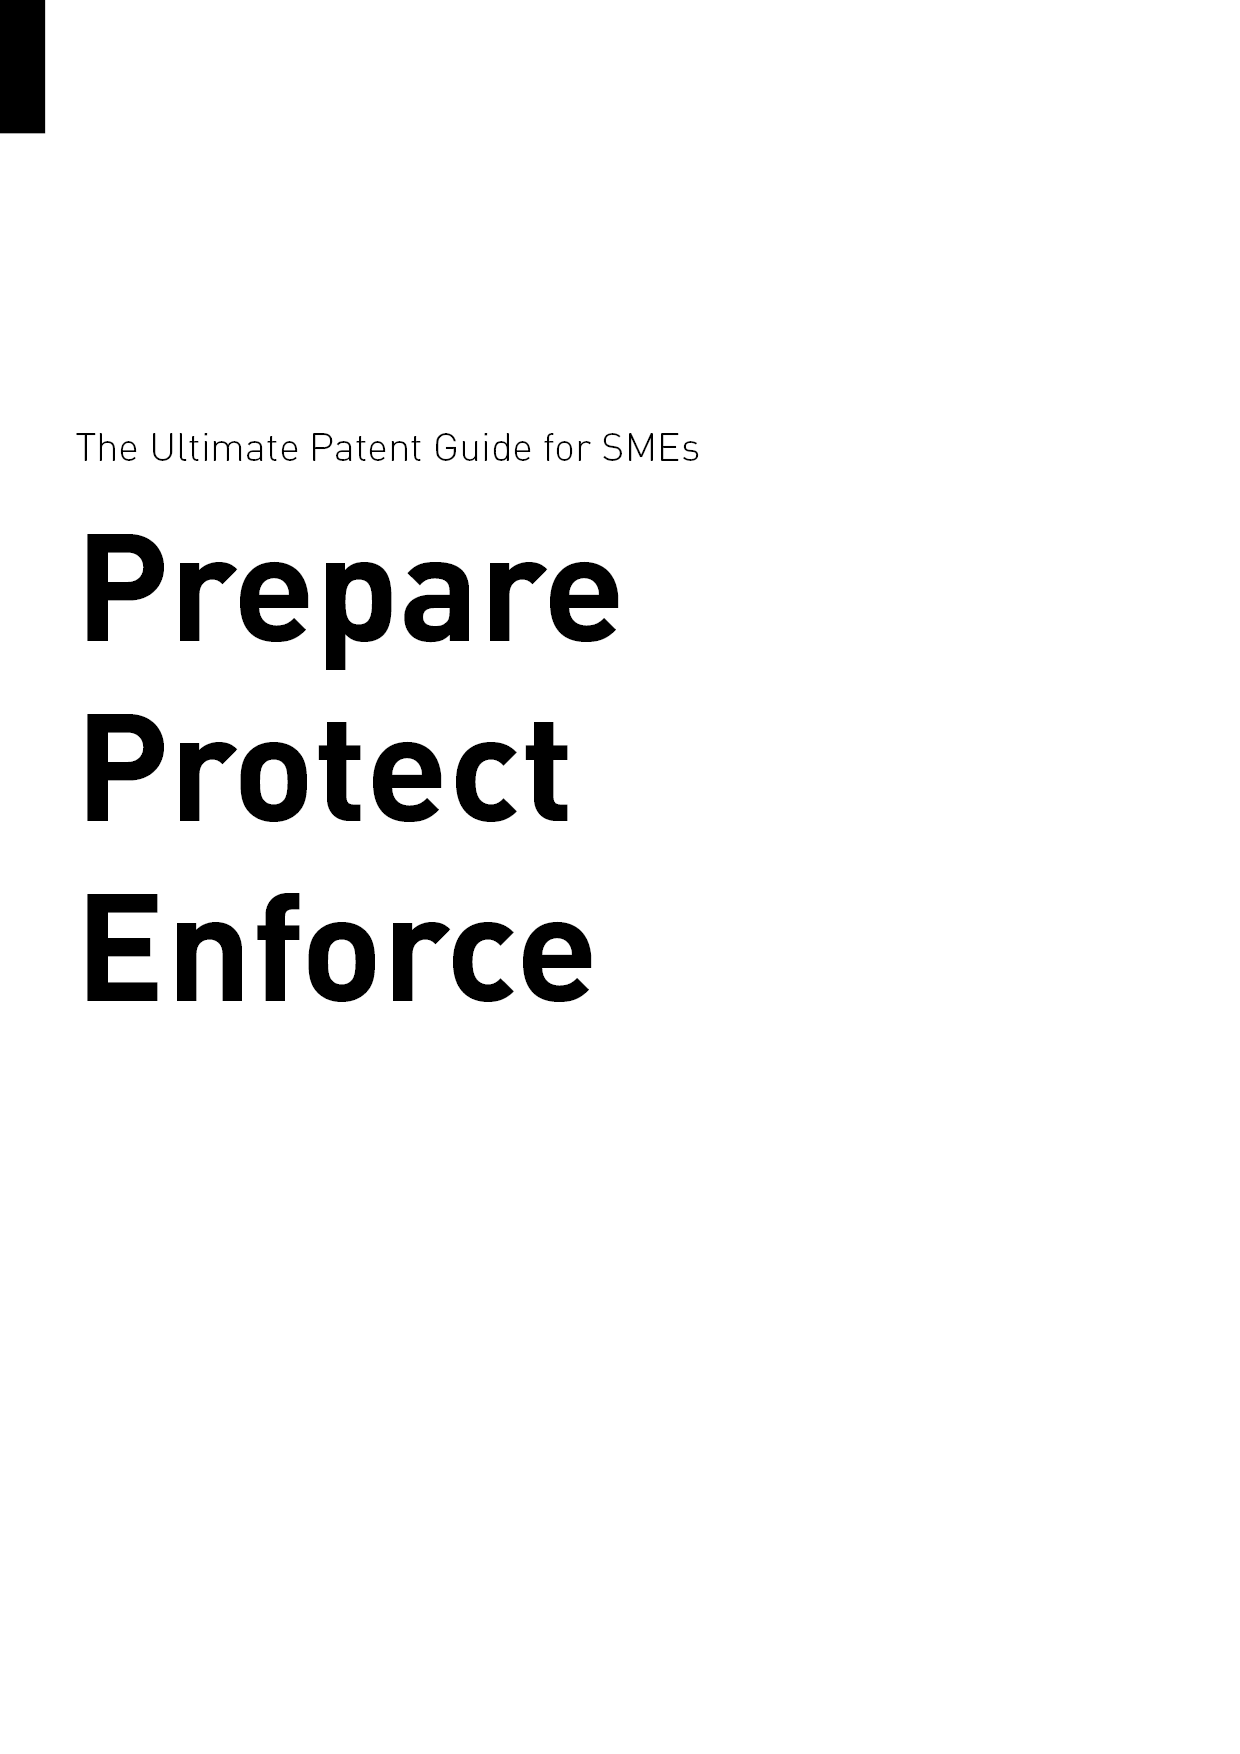 The Ultimate Patent Guide For SMEs: Prepare, Protect & Enforce